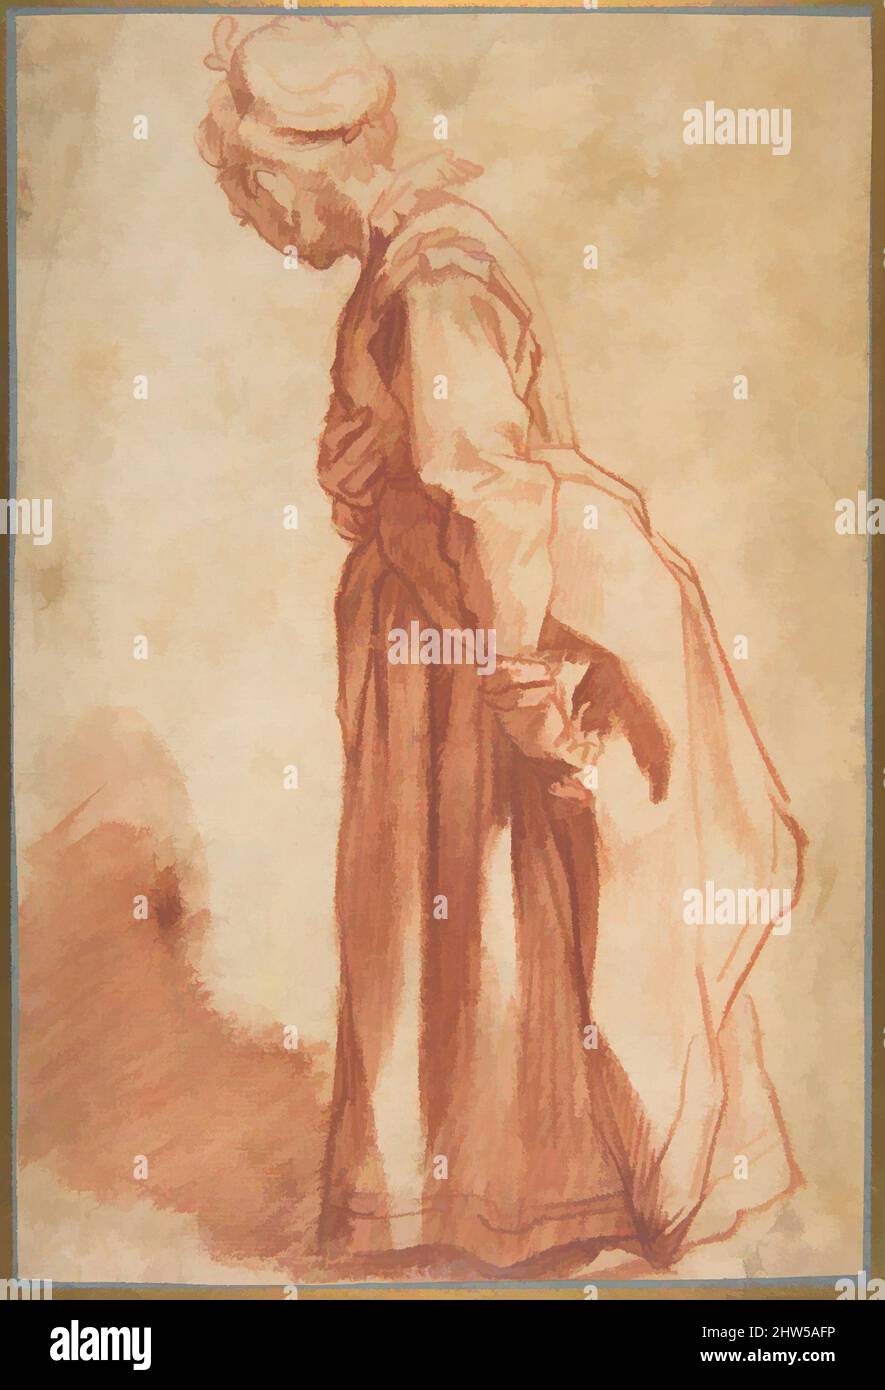 Art inspired by Standing Woman Looking to Left Background, 1596–98, Red chalk and red wash, 9 3/4 x 6 9/16 in. (24.8 x 16.7 cm), Drawings, Francesco Vanni (Italian, Siena 1563–1610 Siena), Saint Hyacinth, a thirteenth-century Polish Dominican missionary, was canonized in 1594, and, Classic works modernized by Artotop with a splash of modernity. Shapes, color and value, eye-catching visual impact on art. Emotions through freedom of artworks in a contemporary way. A timeless message pursuing a wildly creative new direction. Artists turning to the digital medium and creating the Artotop NFT Stock Photo